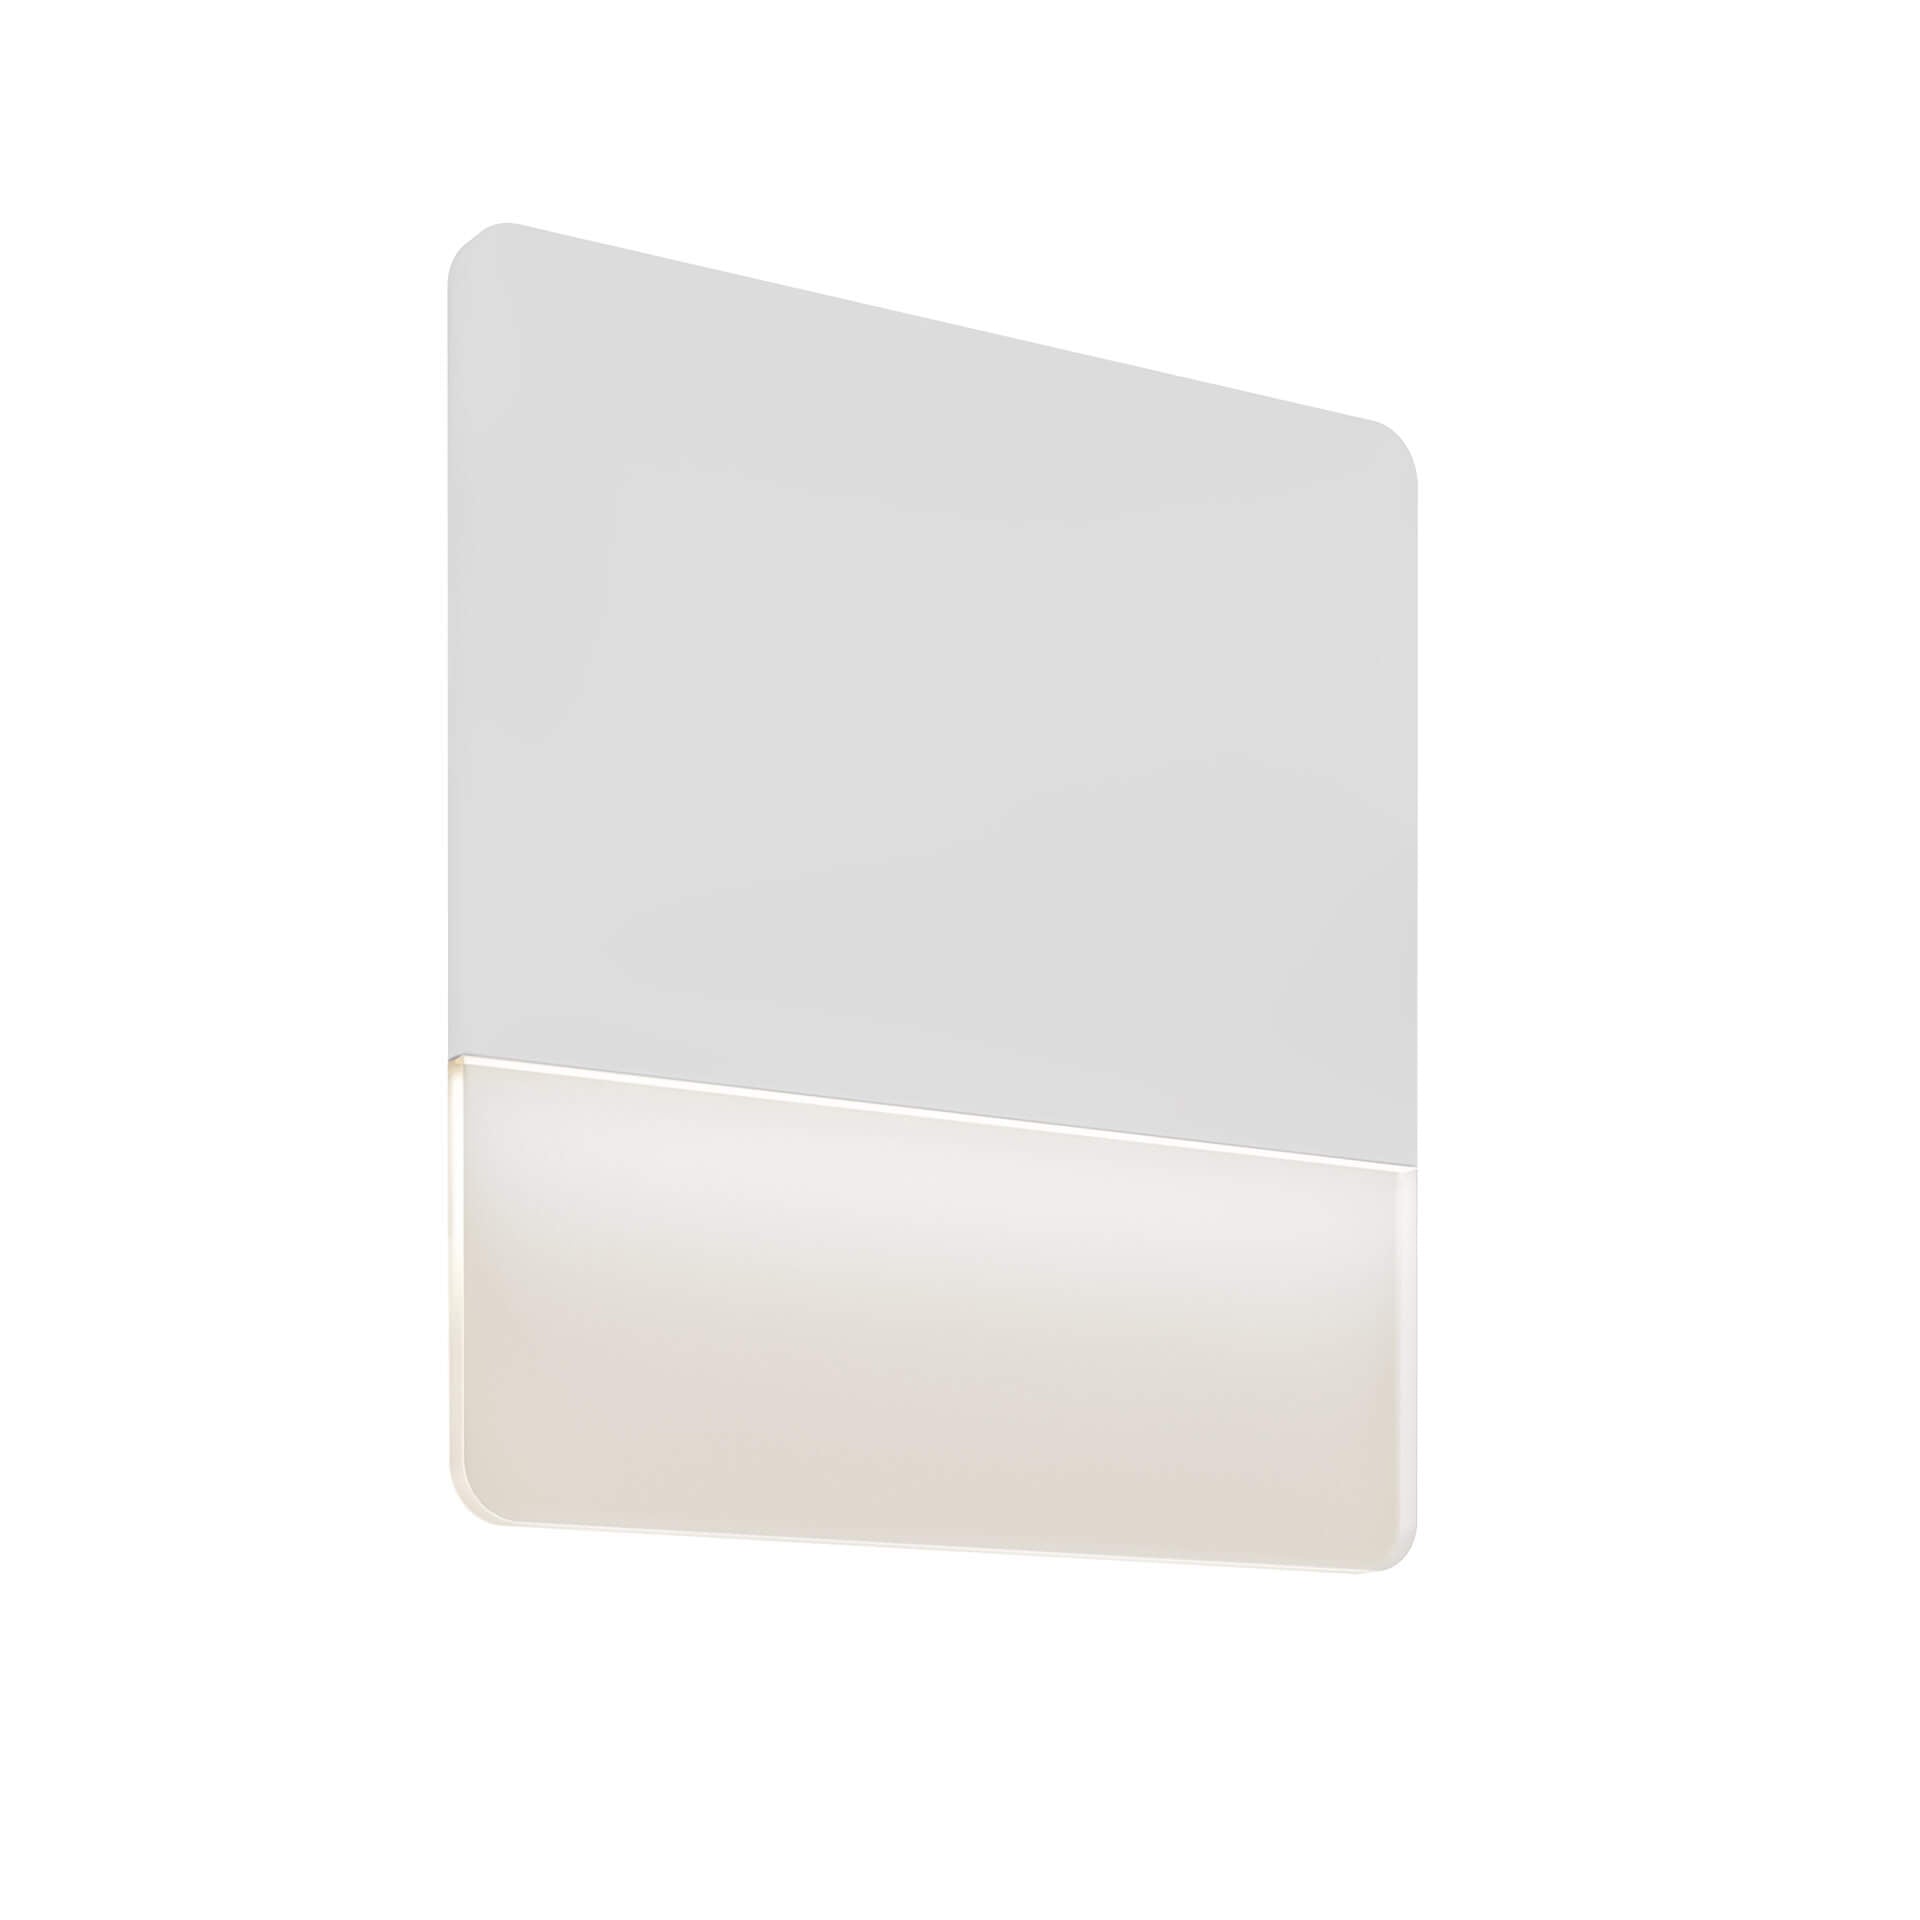 ALTO Outdoor wall lighting White INTEGRATED LED - SQS15-3K-WH | DALS